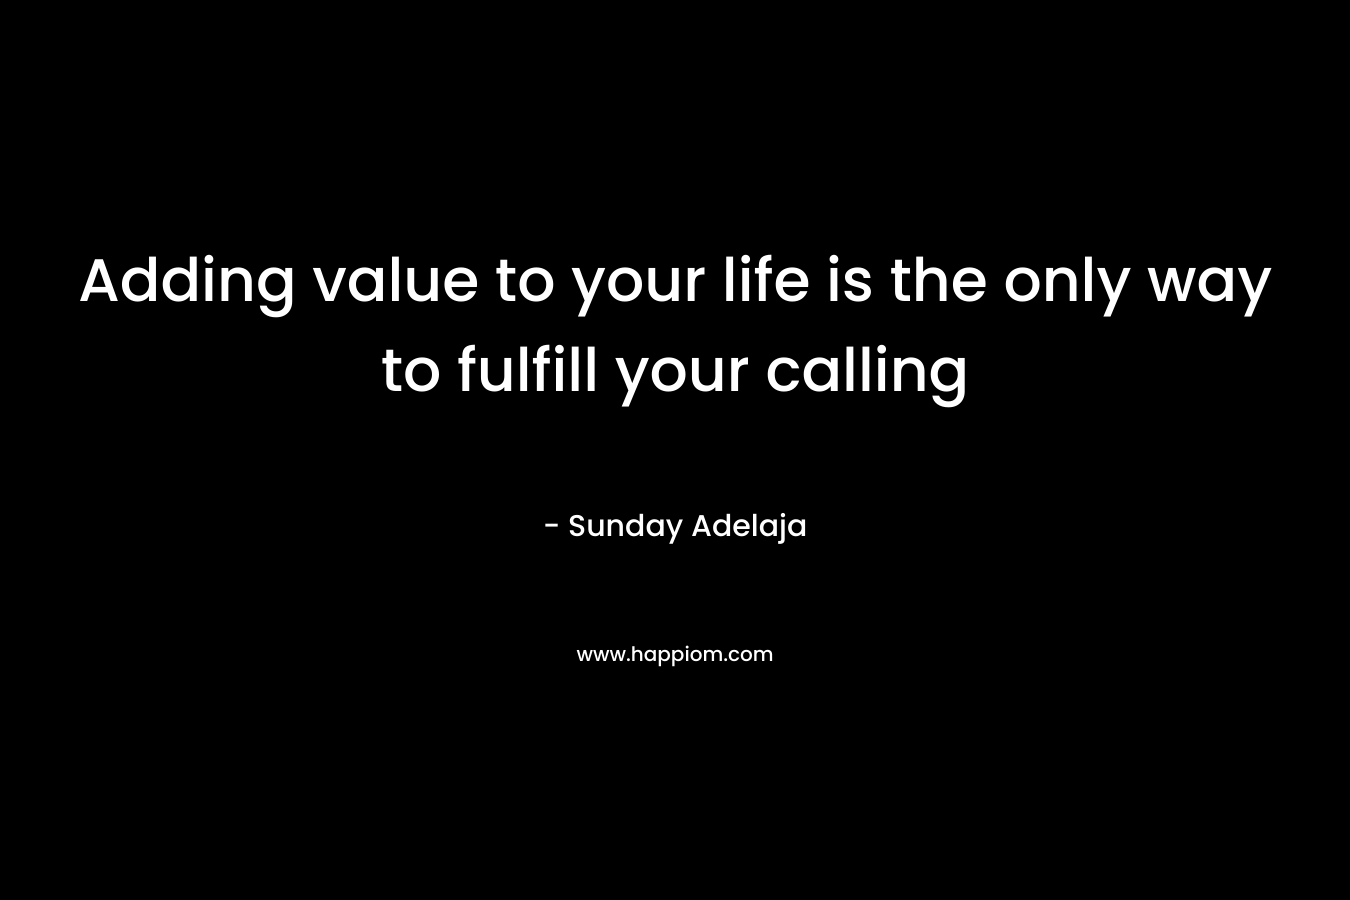 Adding value to your life is the only way to fulfill your calling